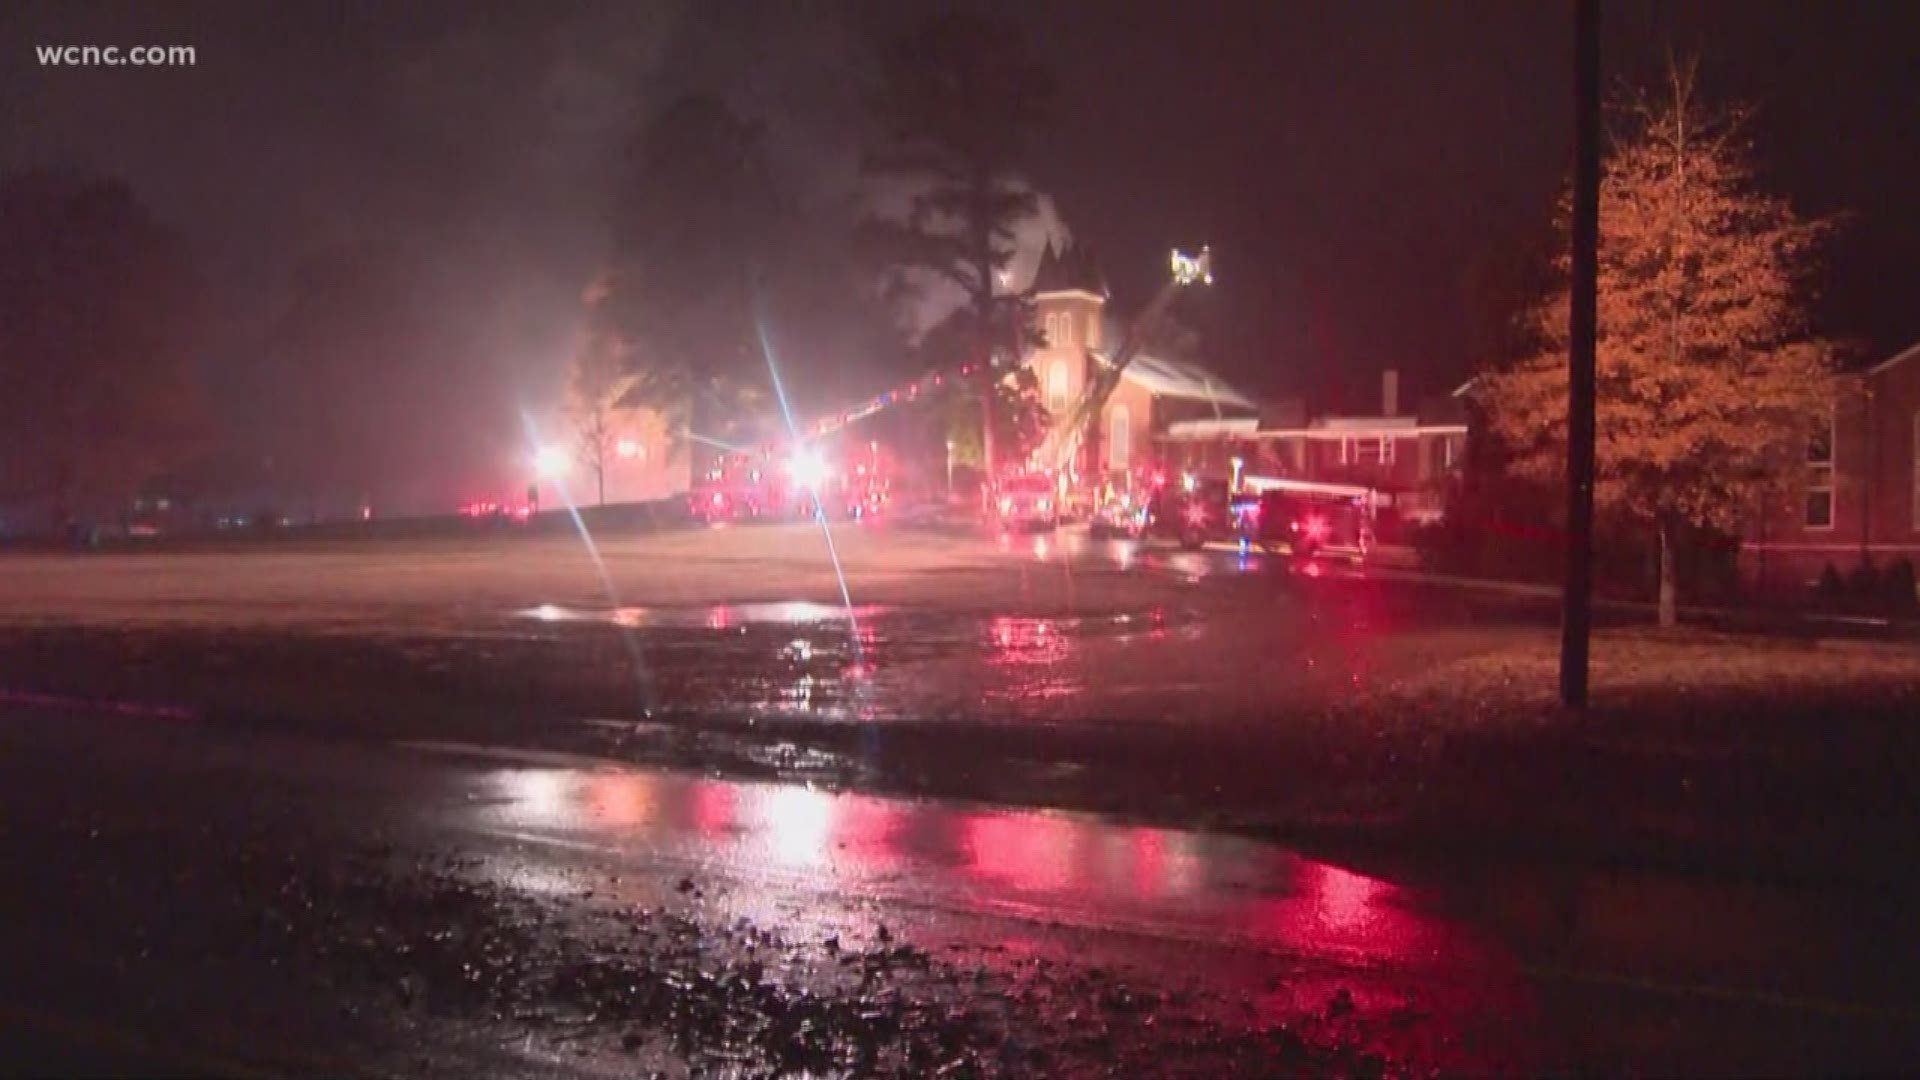 An out of control fire is burning at the Unity Presbyterian Church in Fort Mill, South Carolina.